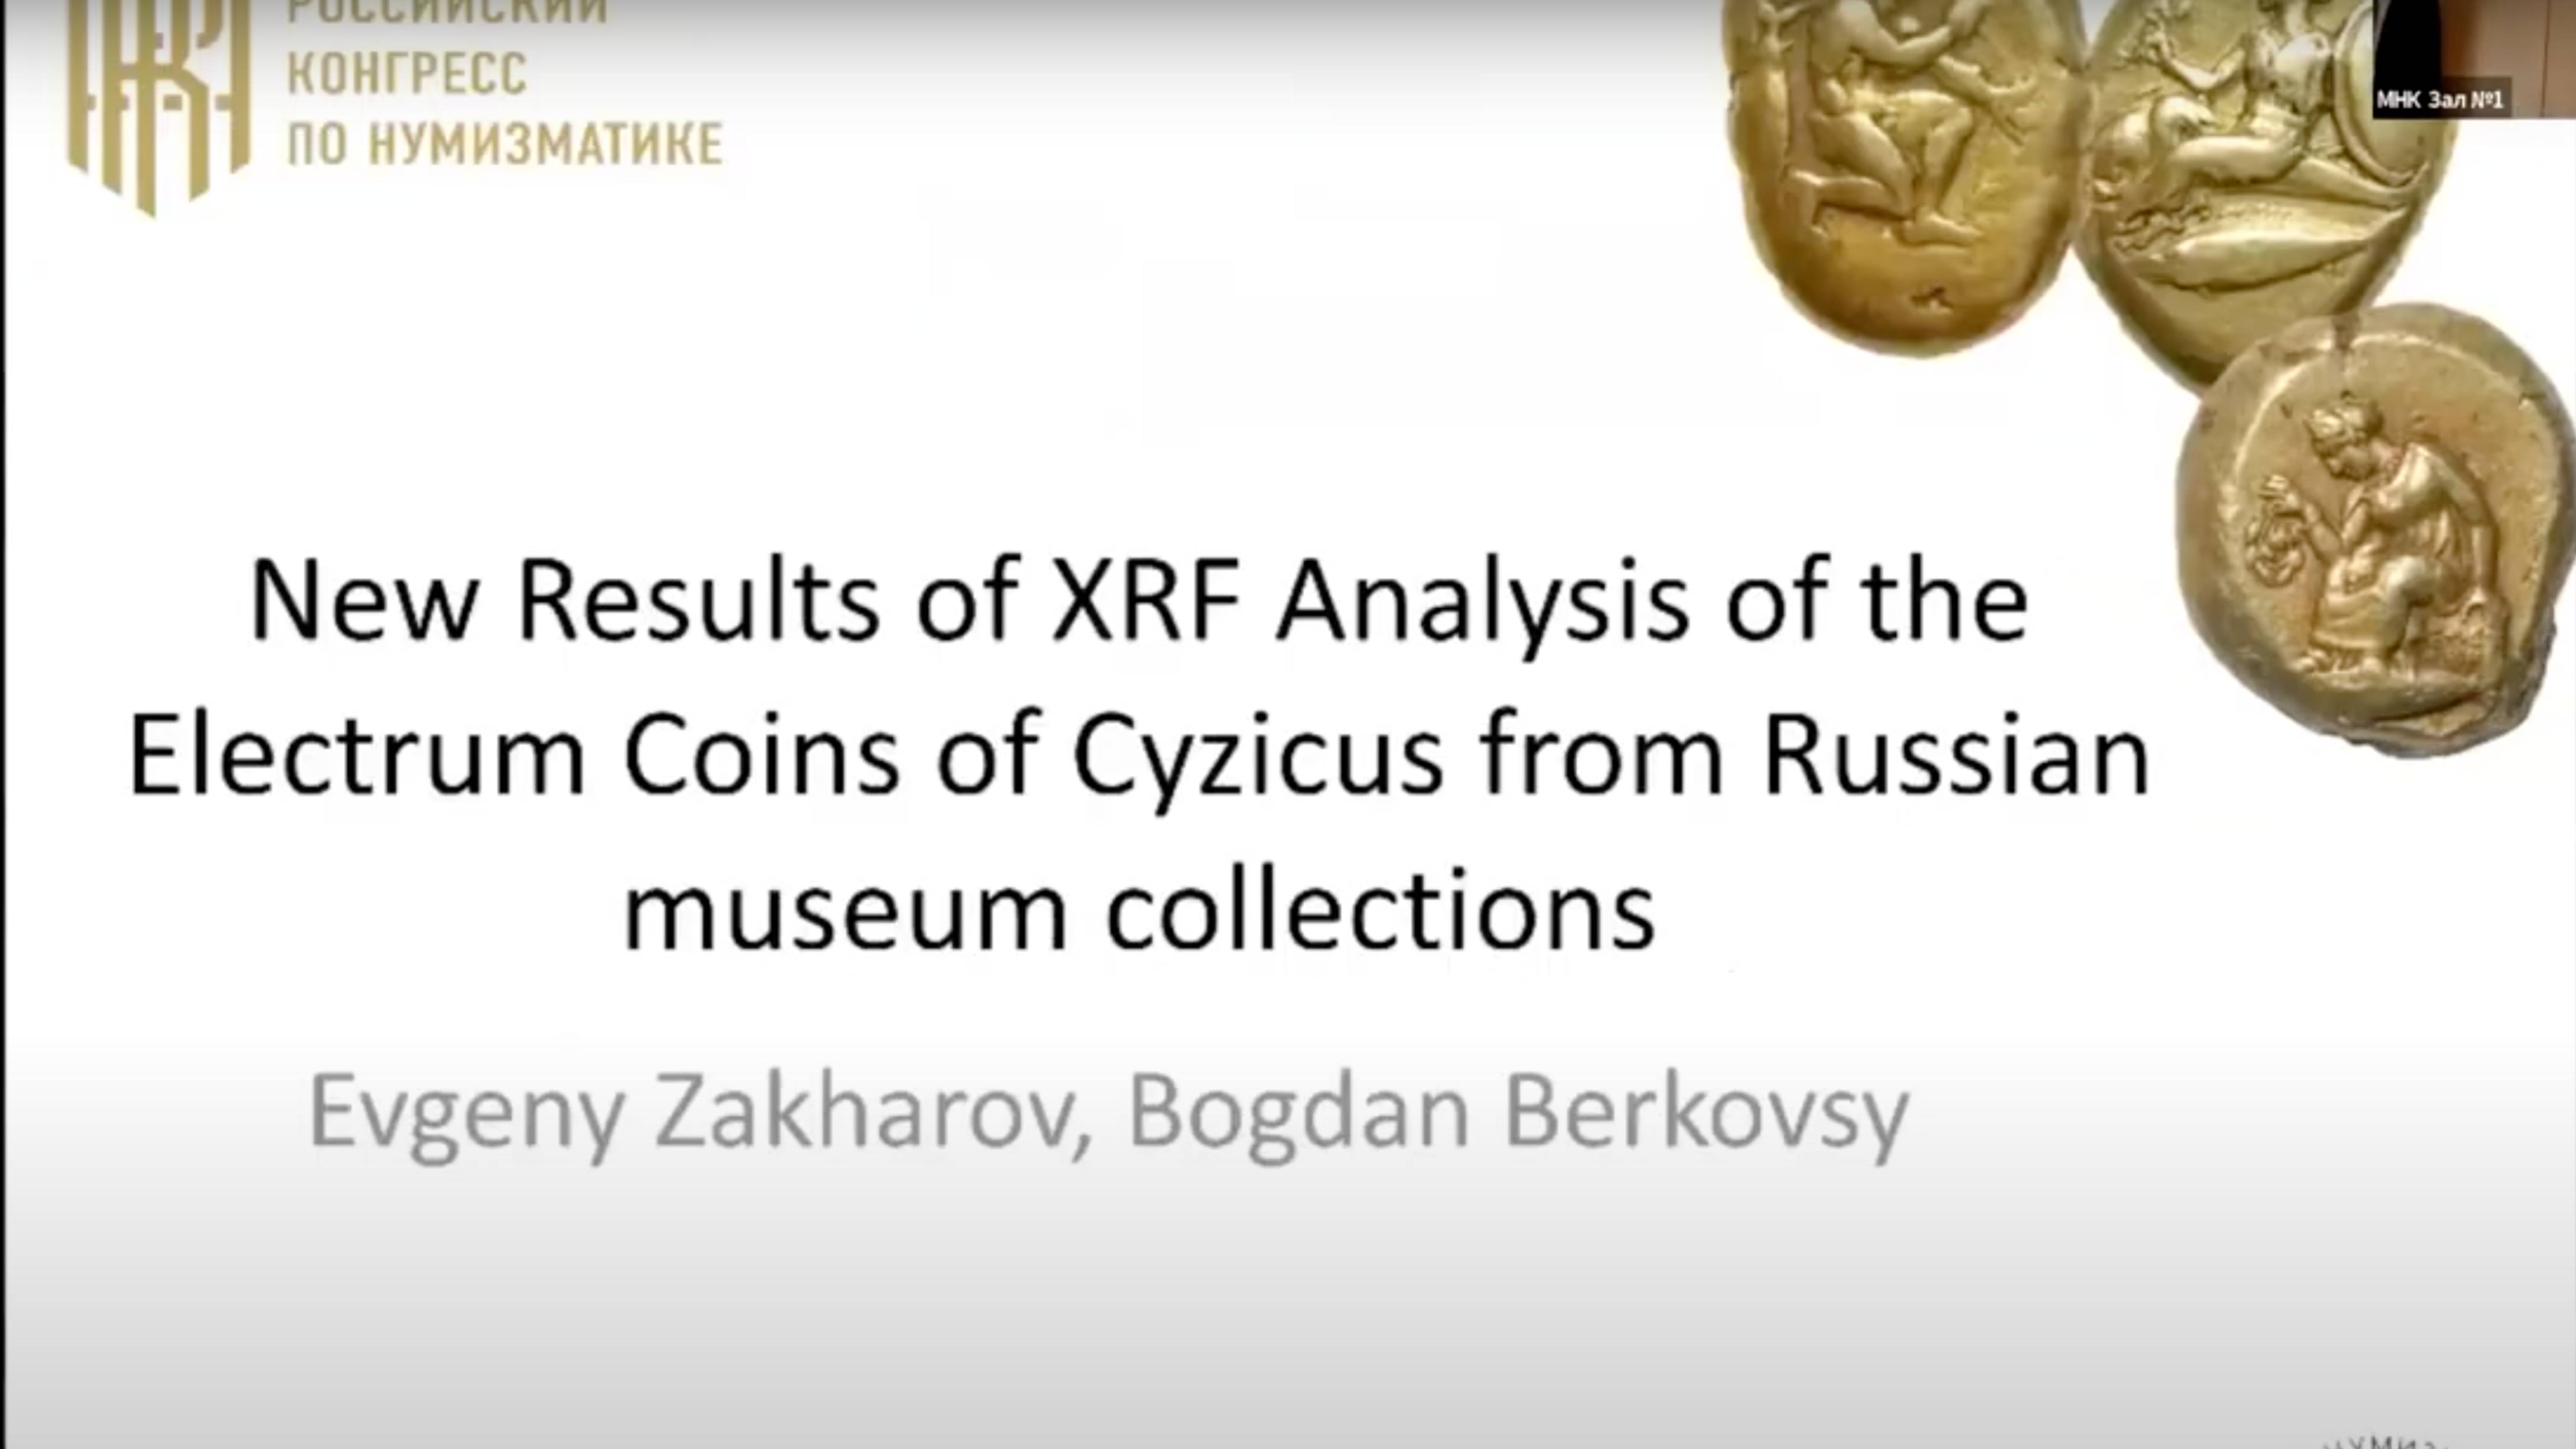 ГИМ_МНК_"New results of XRF Analysis of the Electrum Coins from Russian museum collection"